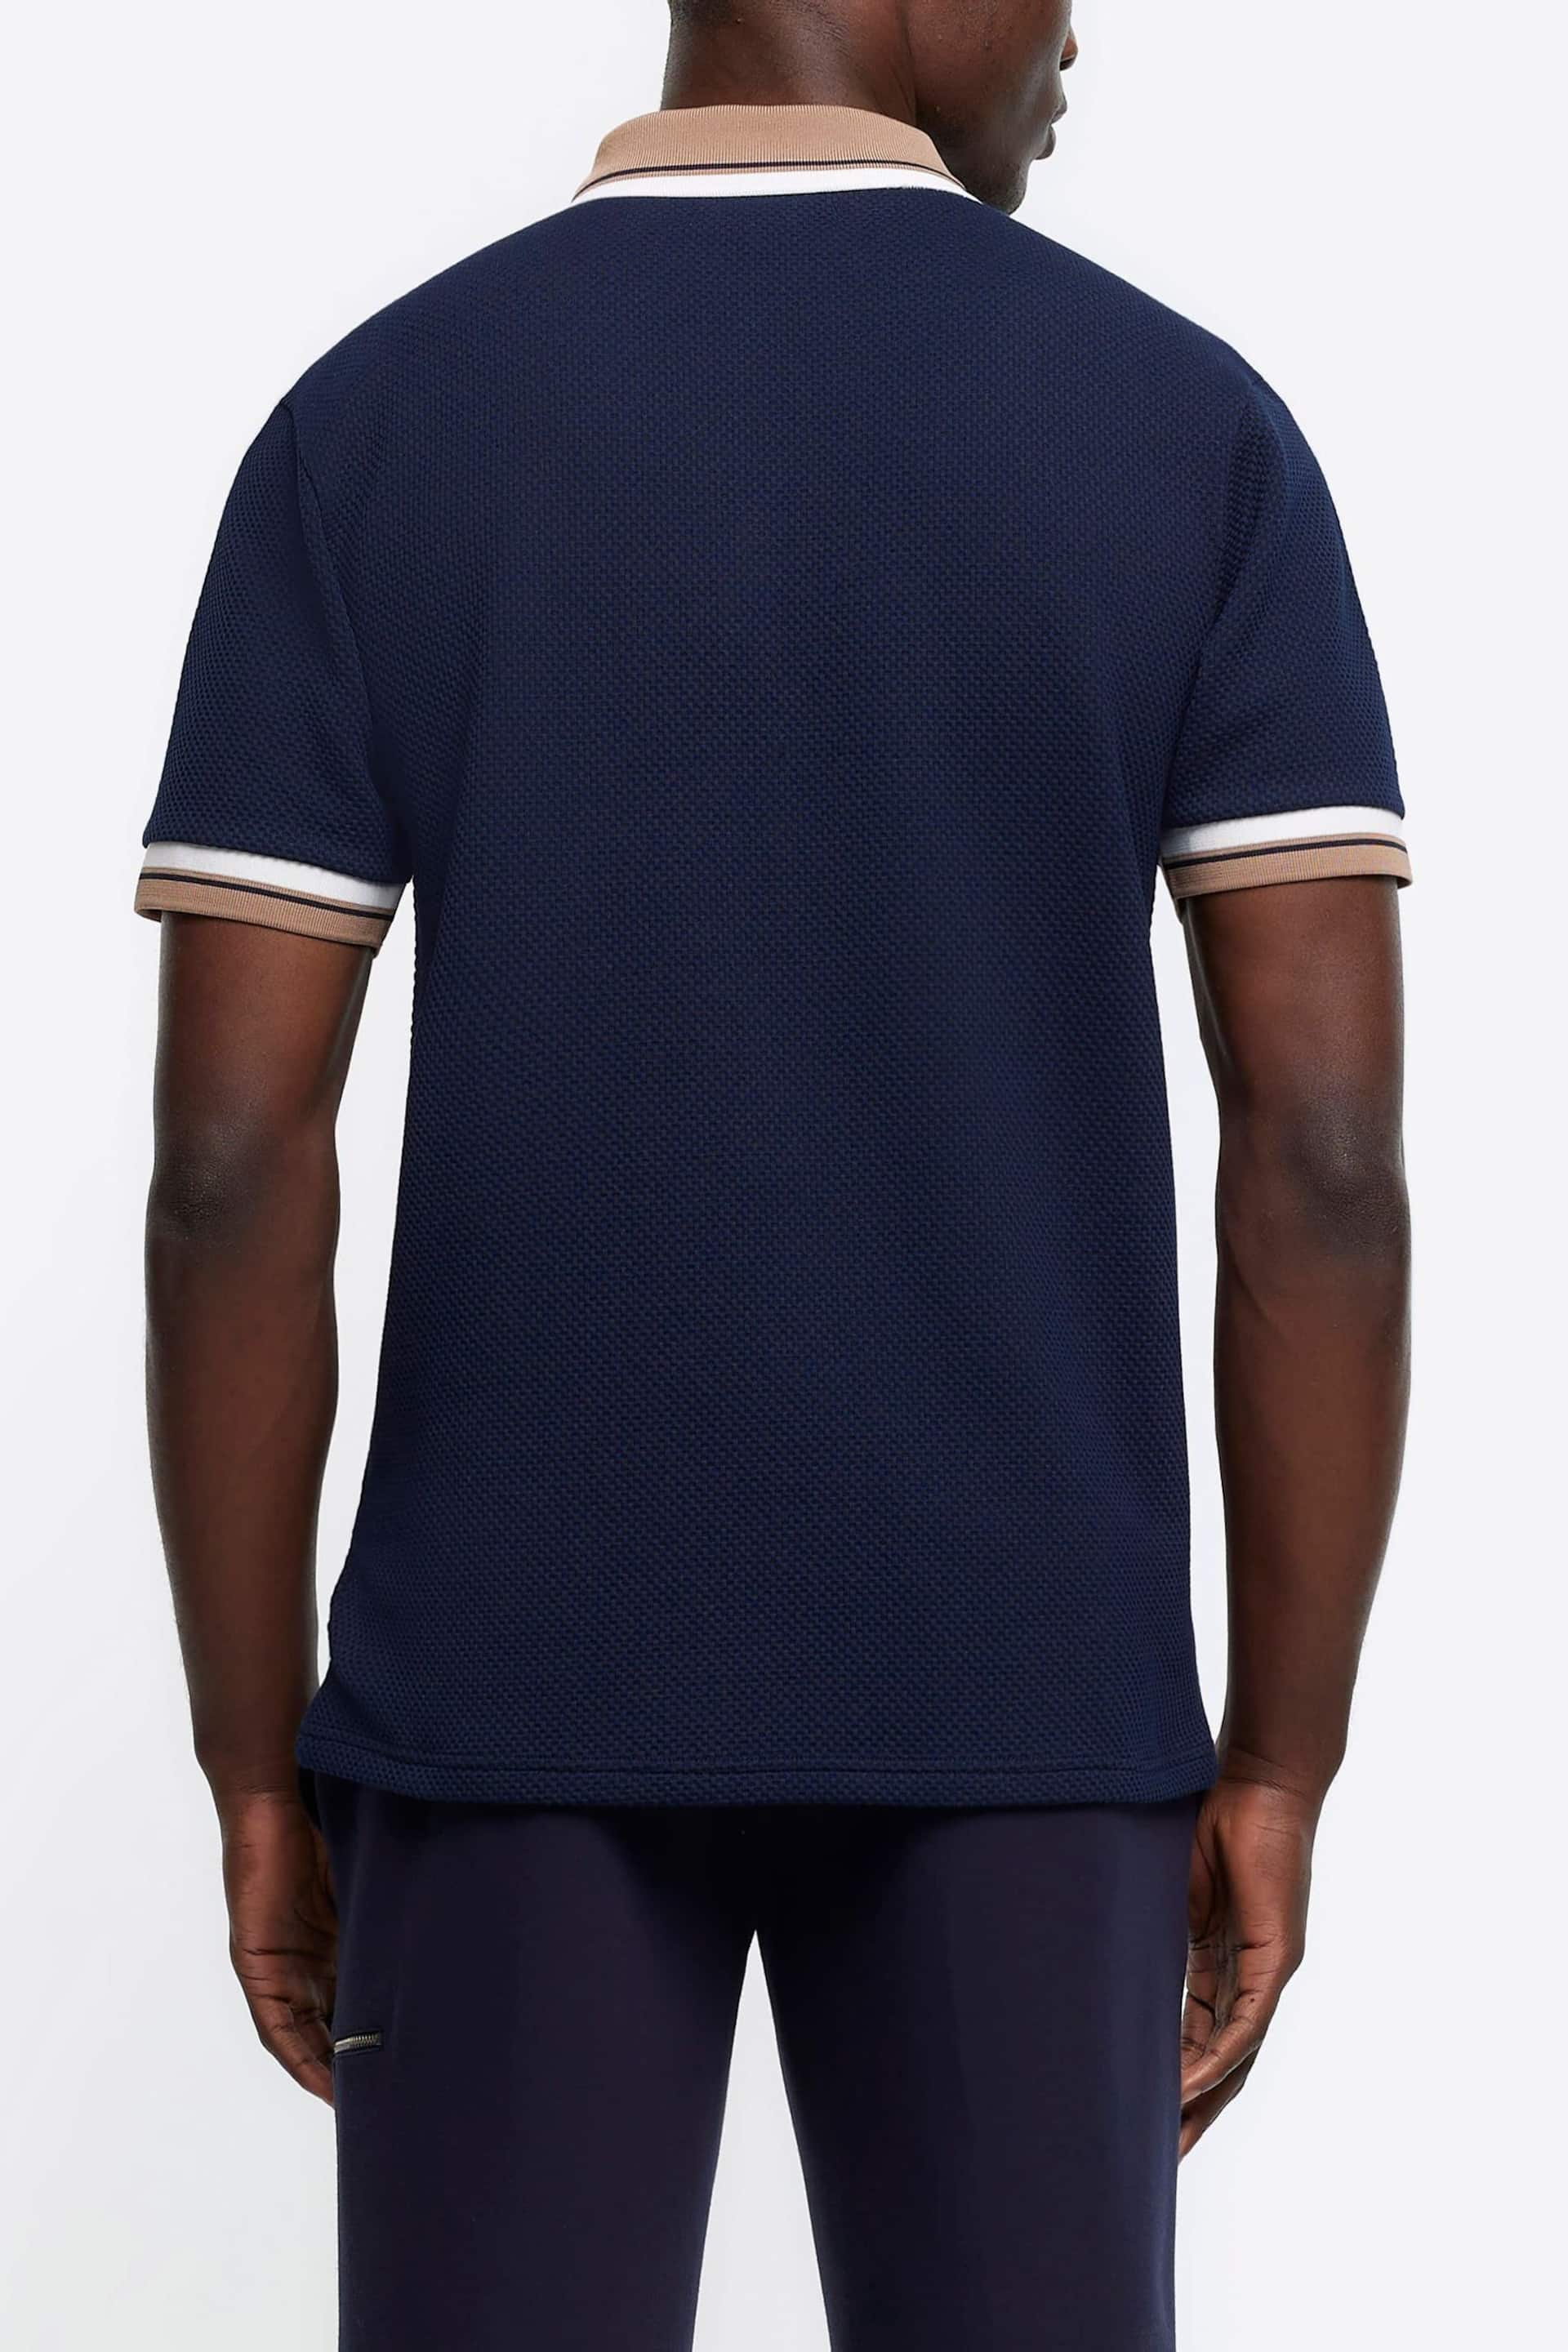 River Island Blue Tap Contrast Collar Regular Fit Polo Shirt - Image 2 of 4